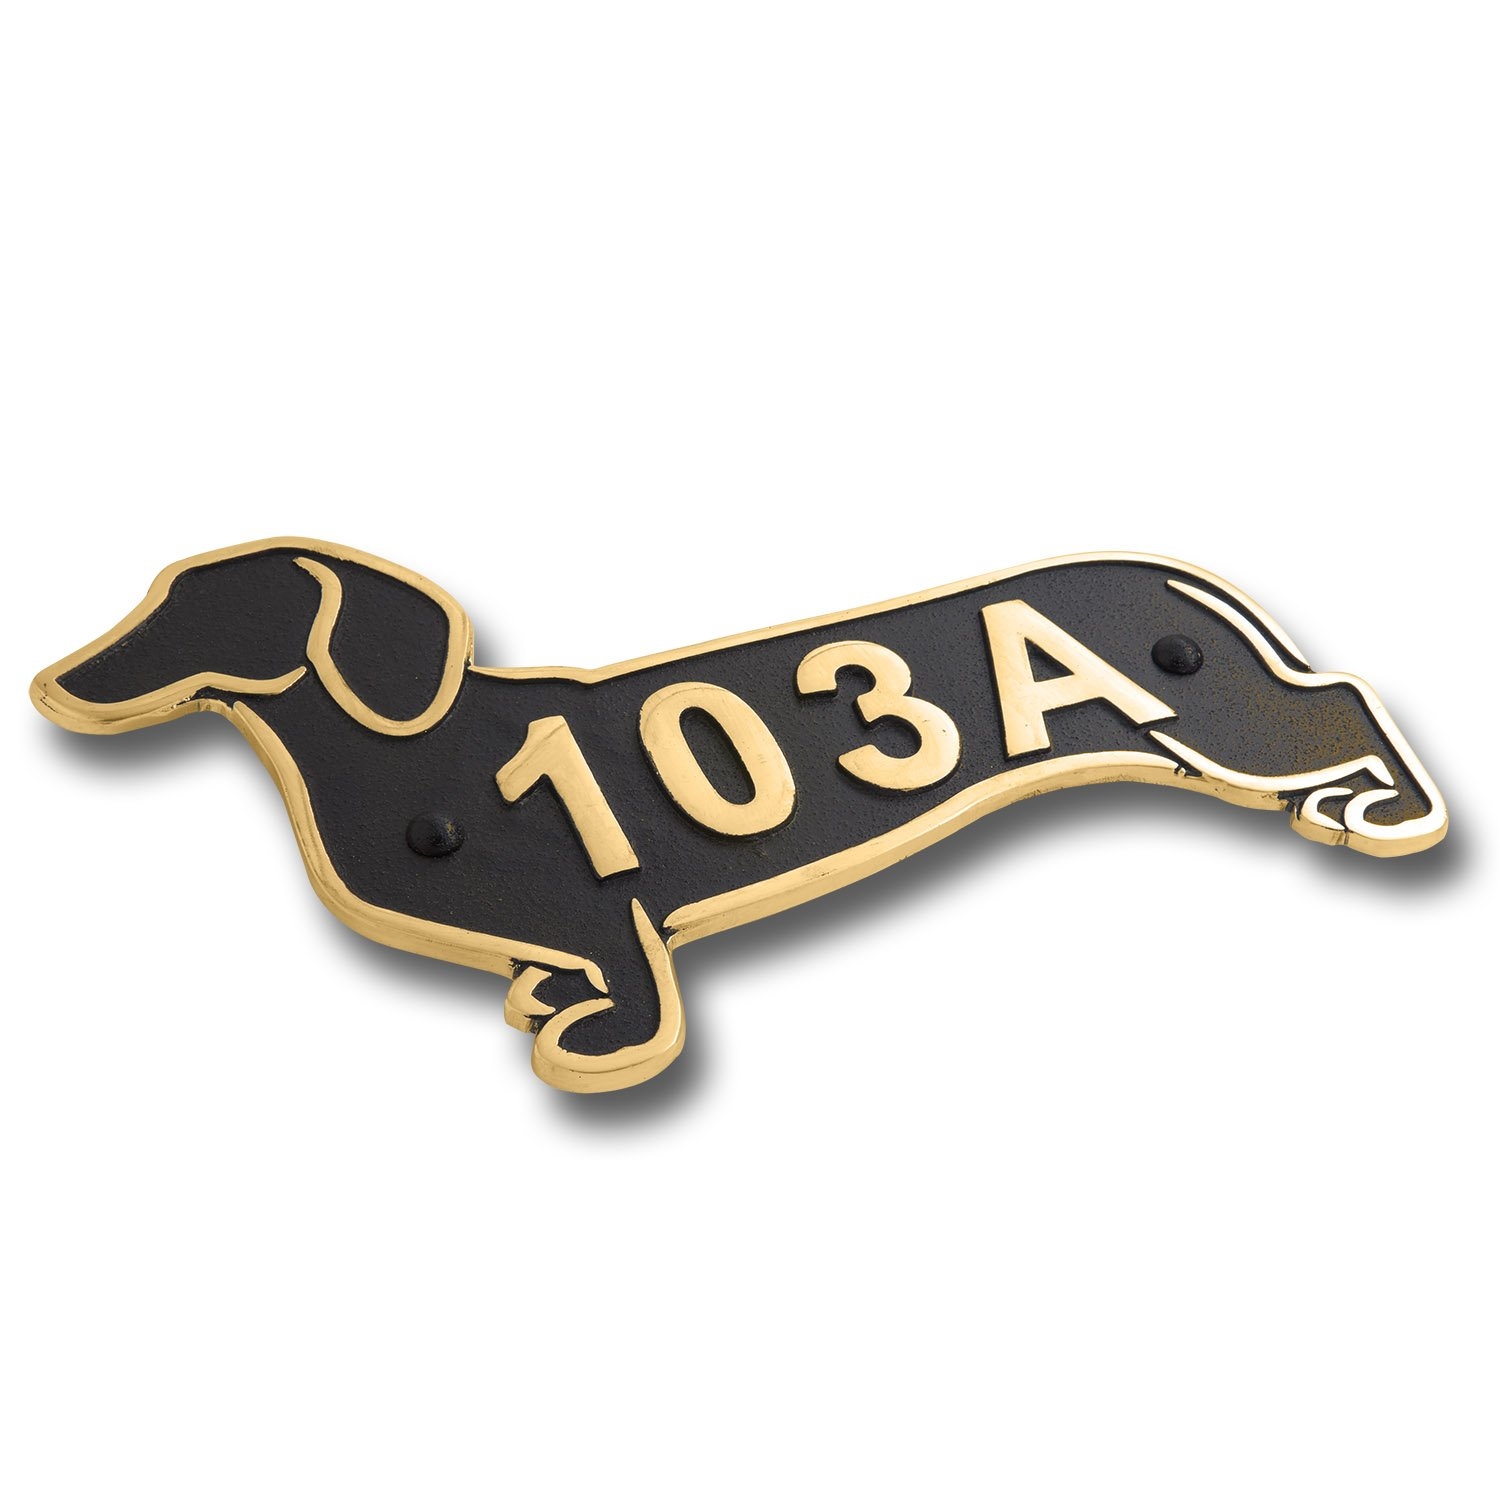 Dachshund Metal House Number Address Plaque. Sausage Dog Gift Idea For A Dachshund Owner. Yard Or Garden Dachshund Décor Makes A Great Gift For Him Or Her – Aluminium & Red